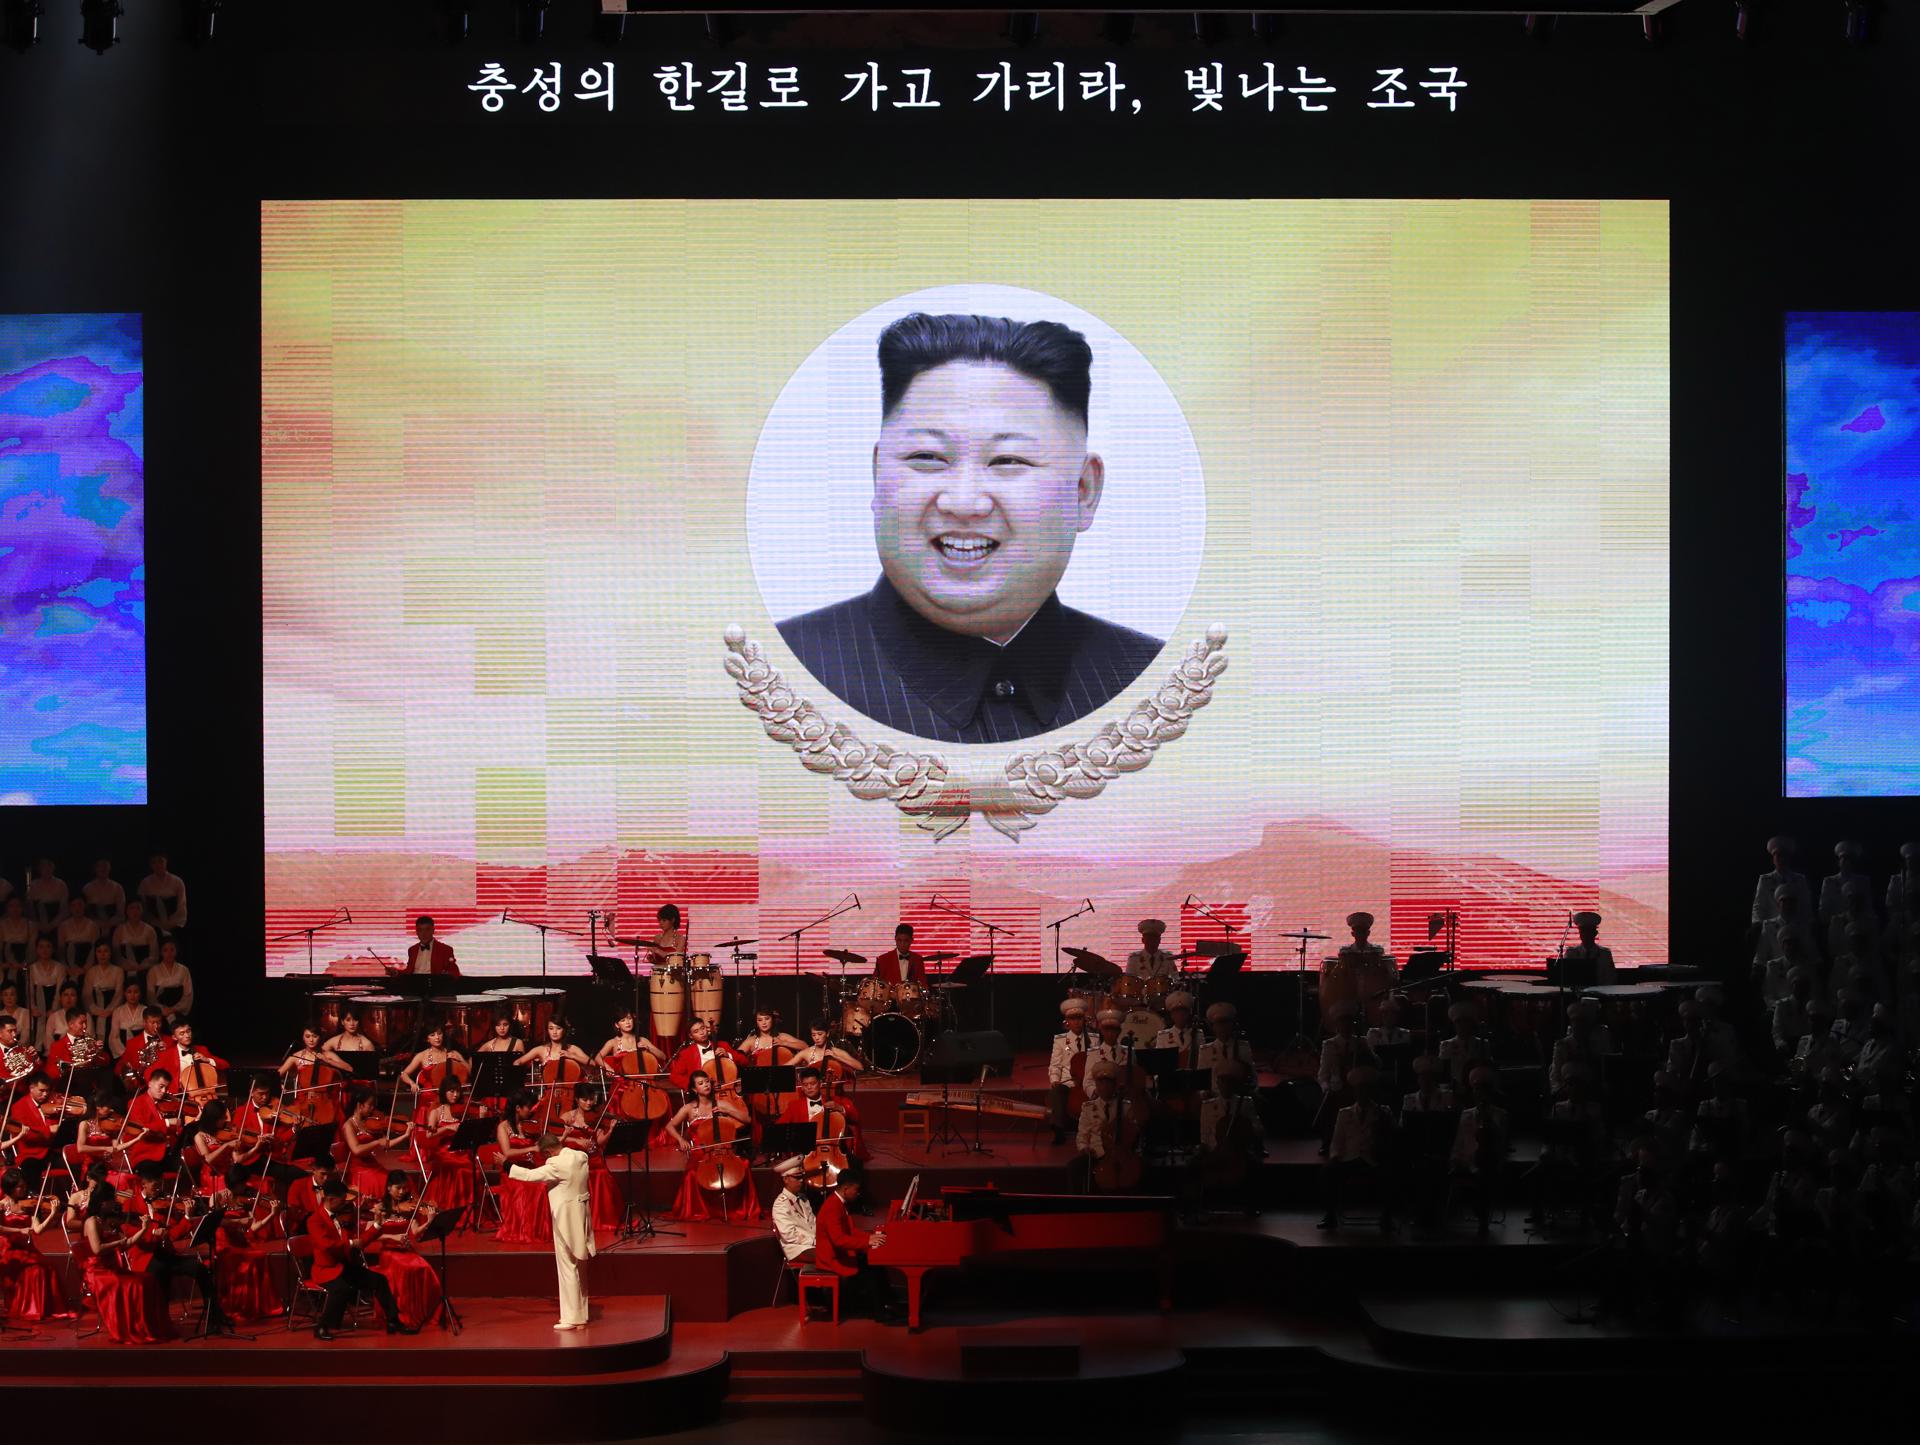 North Korean leader Kim Jong-un is projected on a screen as orchestra musicians perform during a concert celebrating the 70th anniversary of its Founding in Pyongyang, North Korea, 08 September 2018. EFE-EPA FILE/HOW HWEE YOUNG
